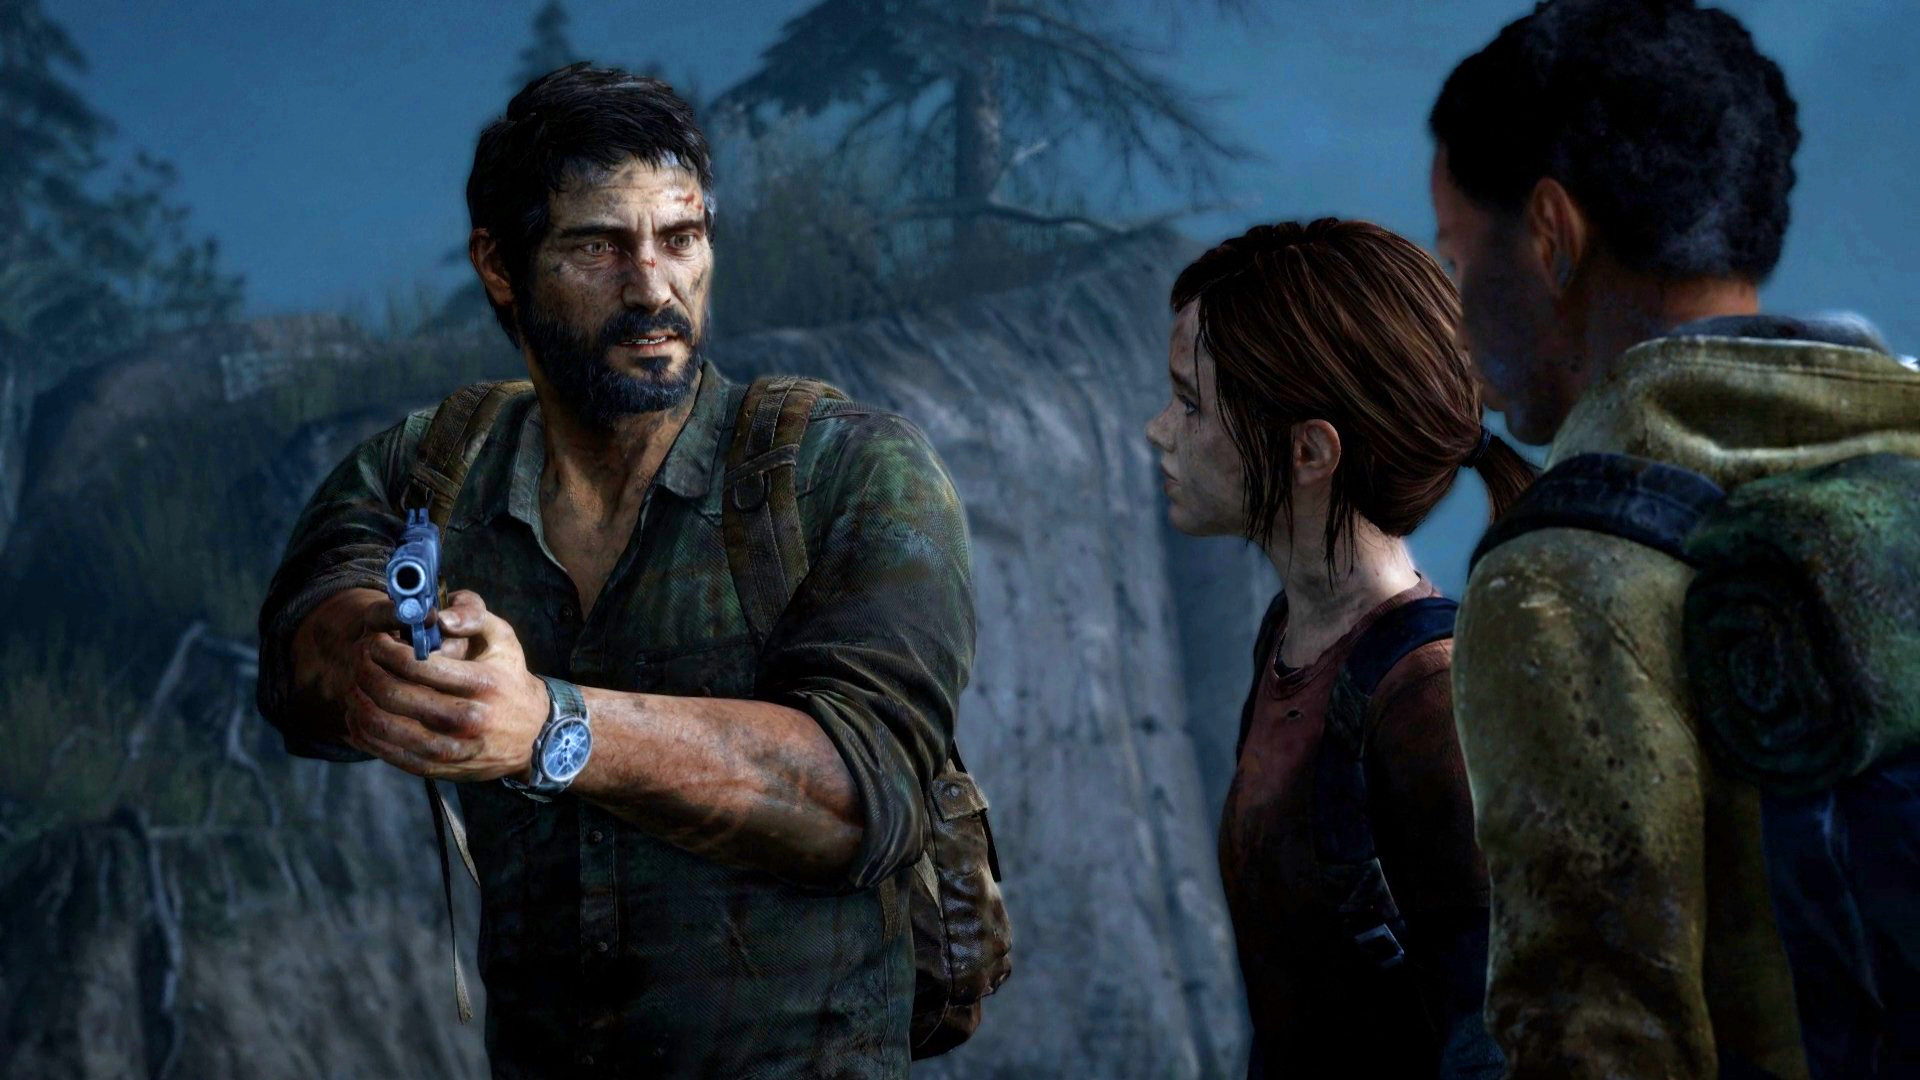 Зе ласт гейм 2. Джоэл the last of us. Гэбриел Луна the last of us. The last of us 1.